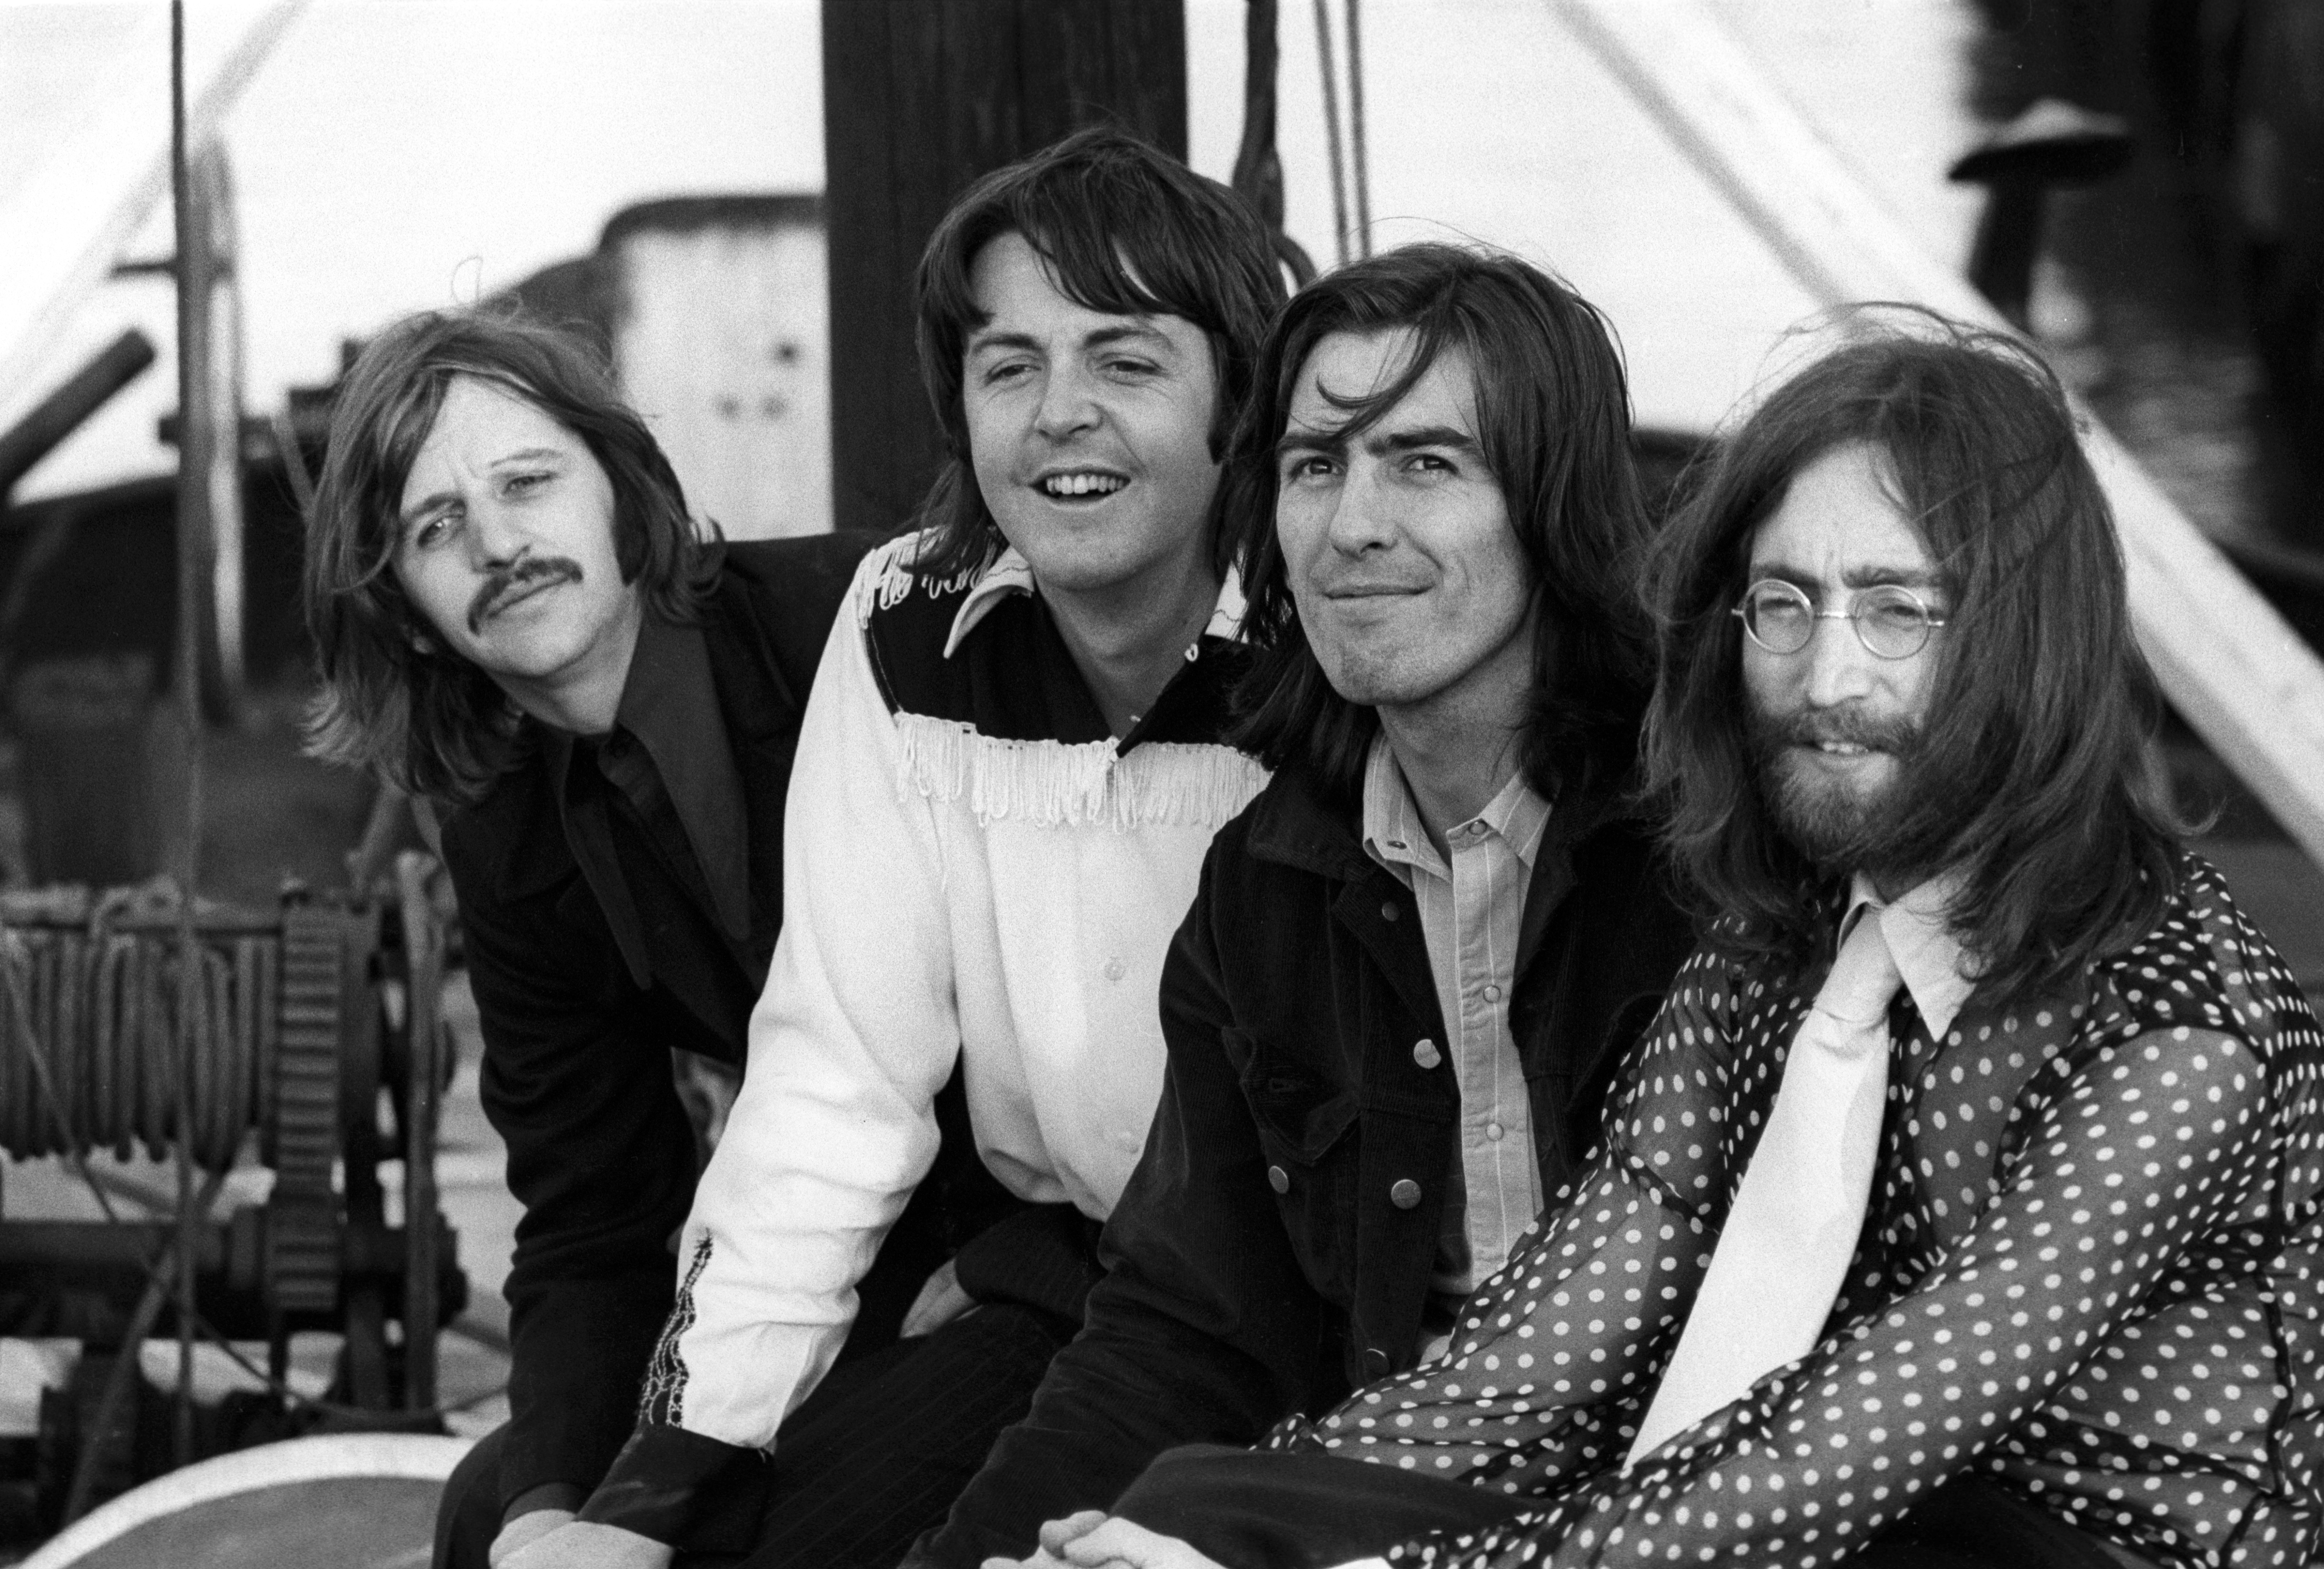 THE BEATLES REVISIT ABBEY ROAD WITH SPECIAL ANNIVERSARY RELEASES SEPTEMBER 27th